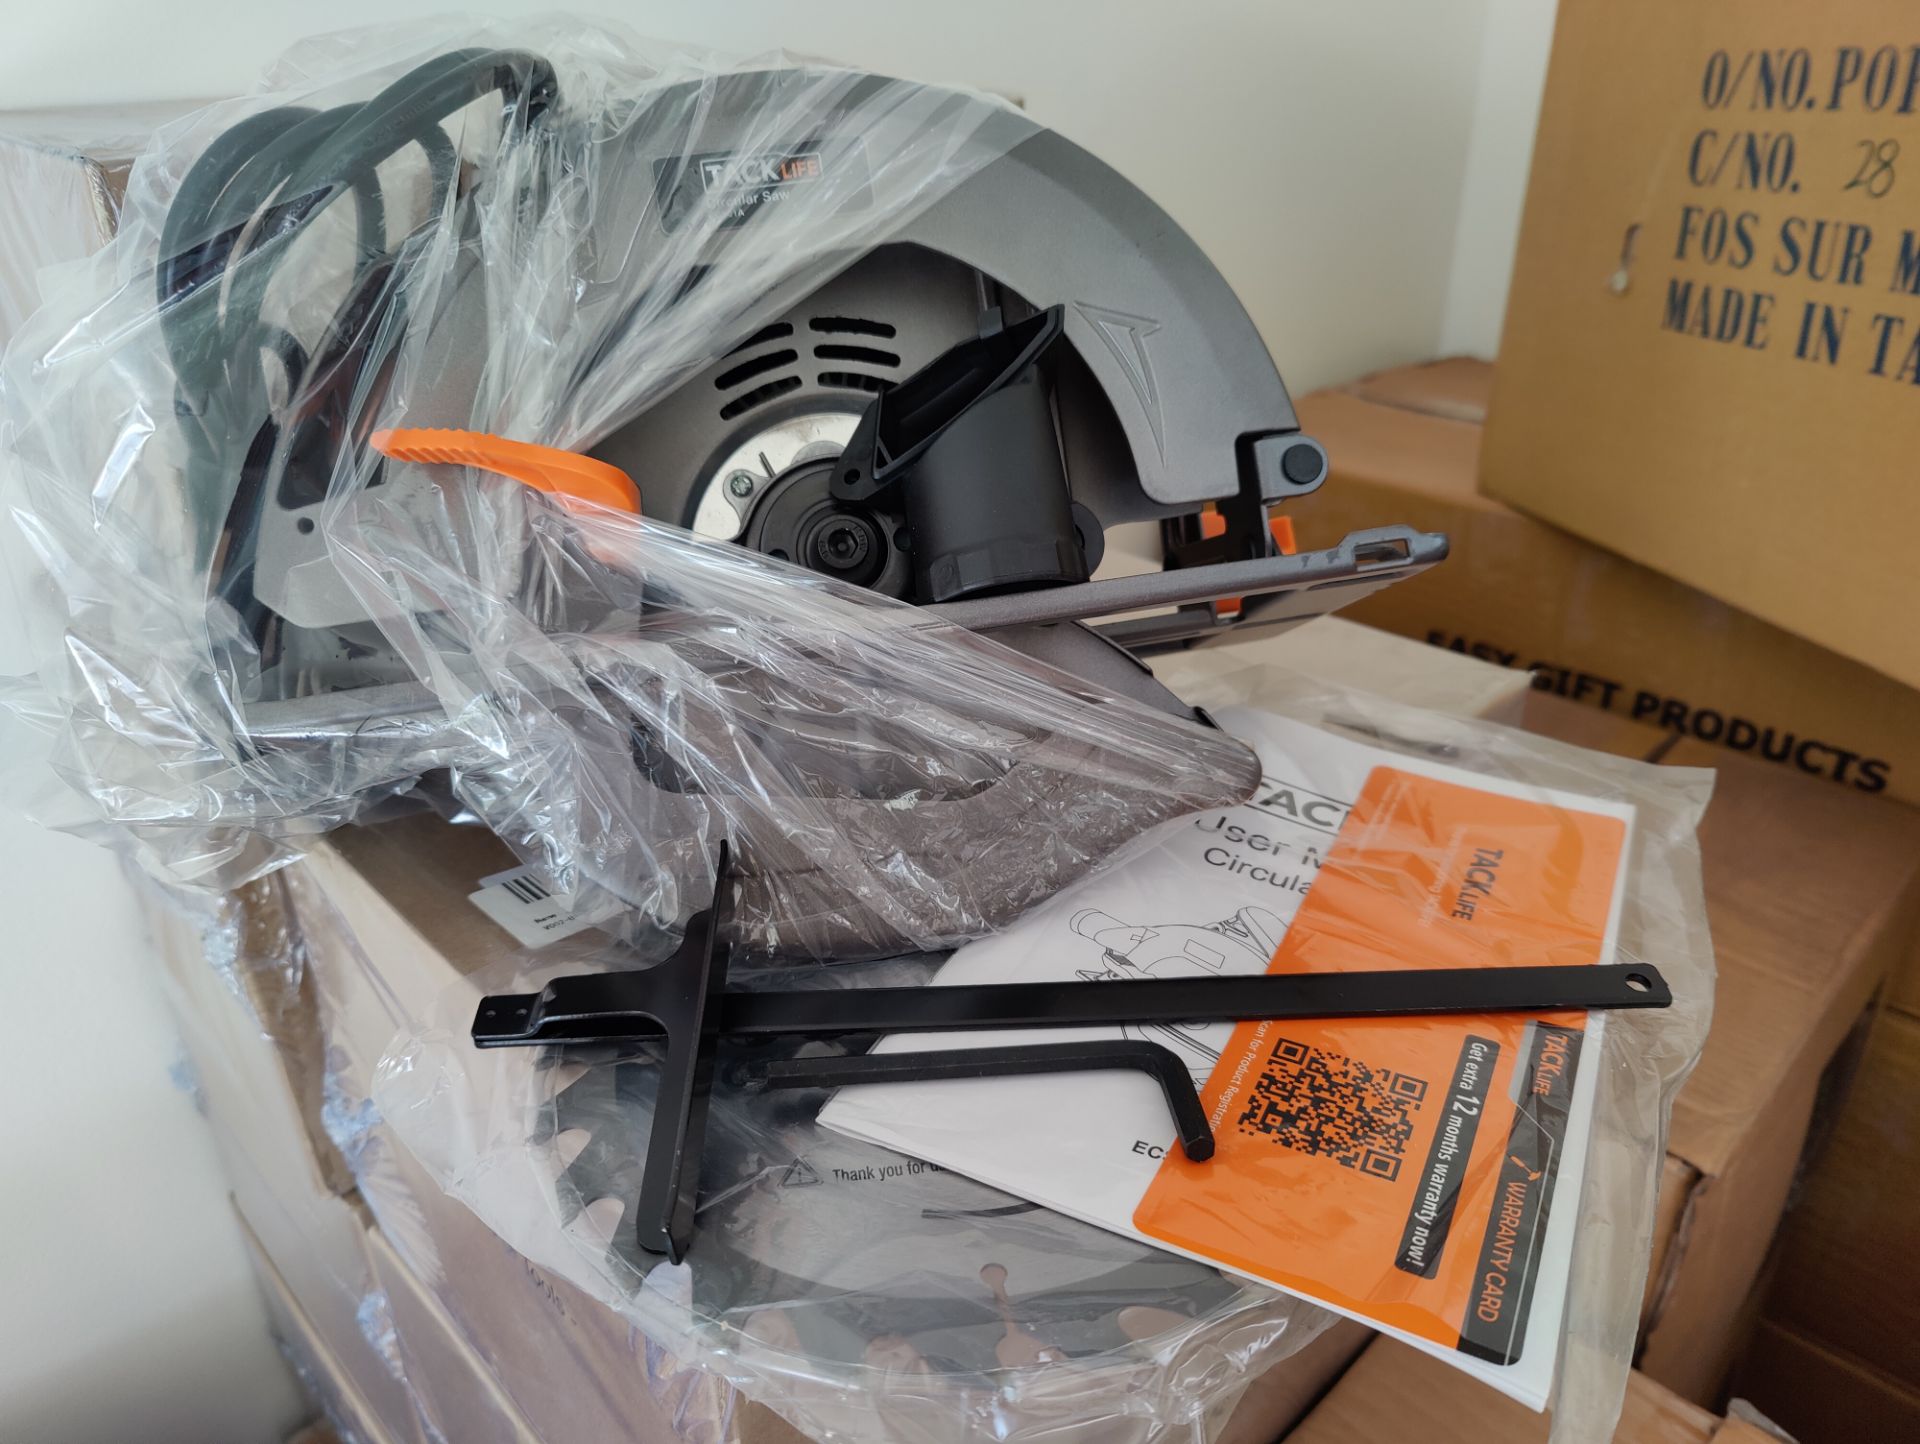 Clearance Joblot 4 x New Boxed Tacklife Electric Circular Saw,1500W, 5000 RPM With Bevel Cuts 2-3... - Bild 2 aus 4